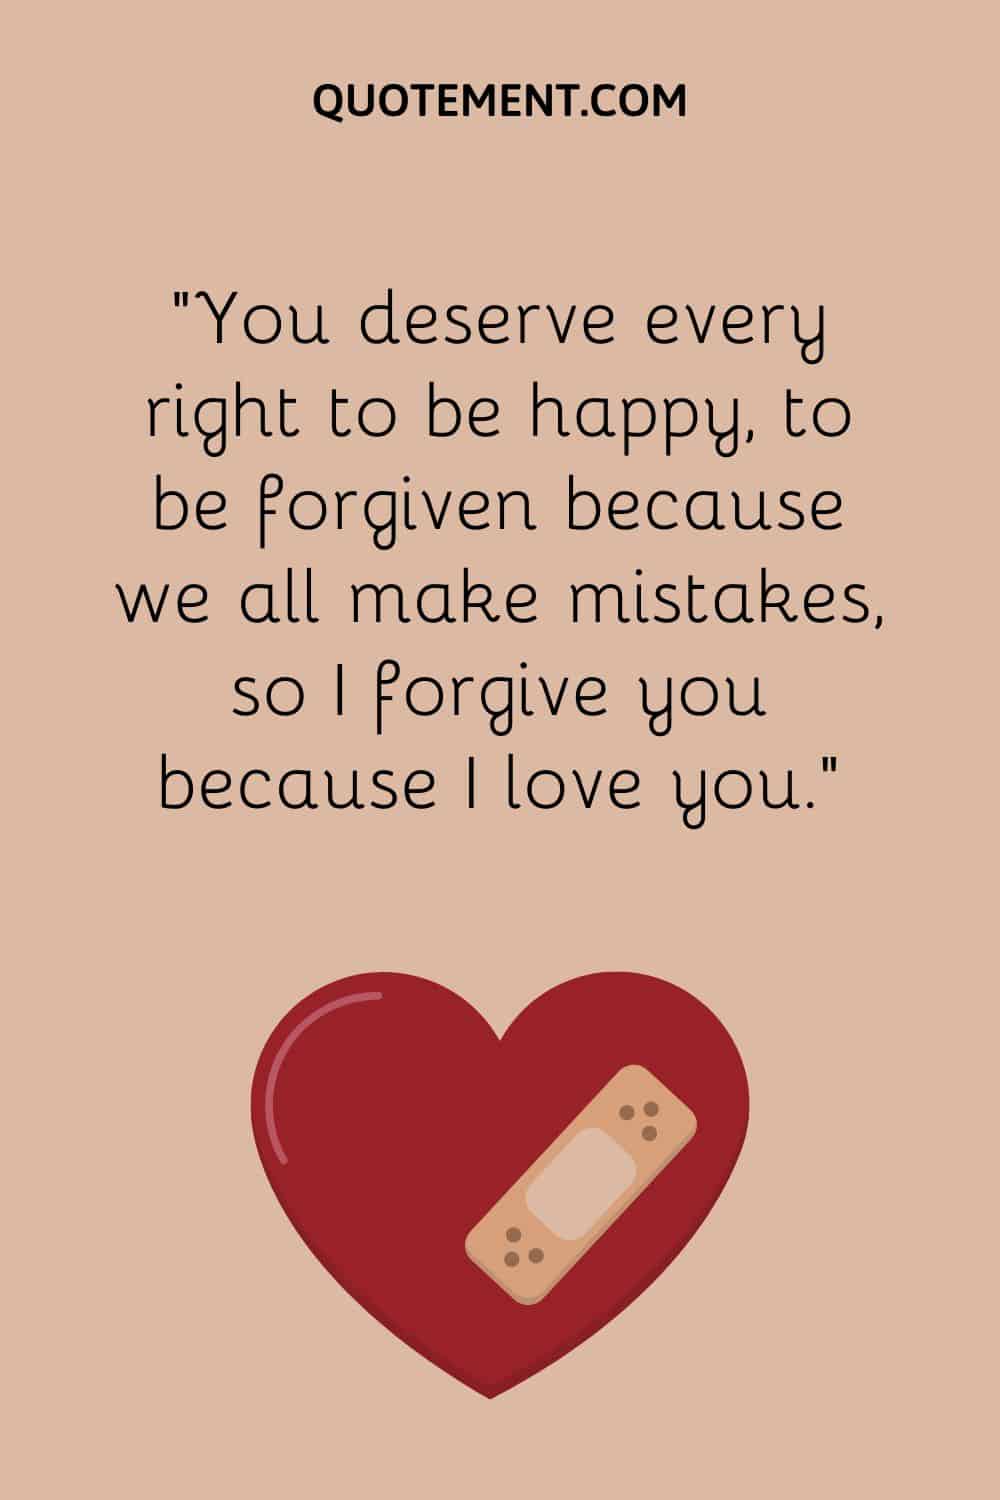 You deserve every right to be happy